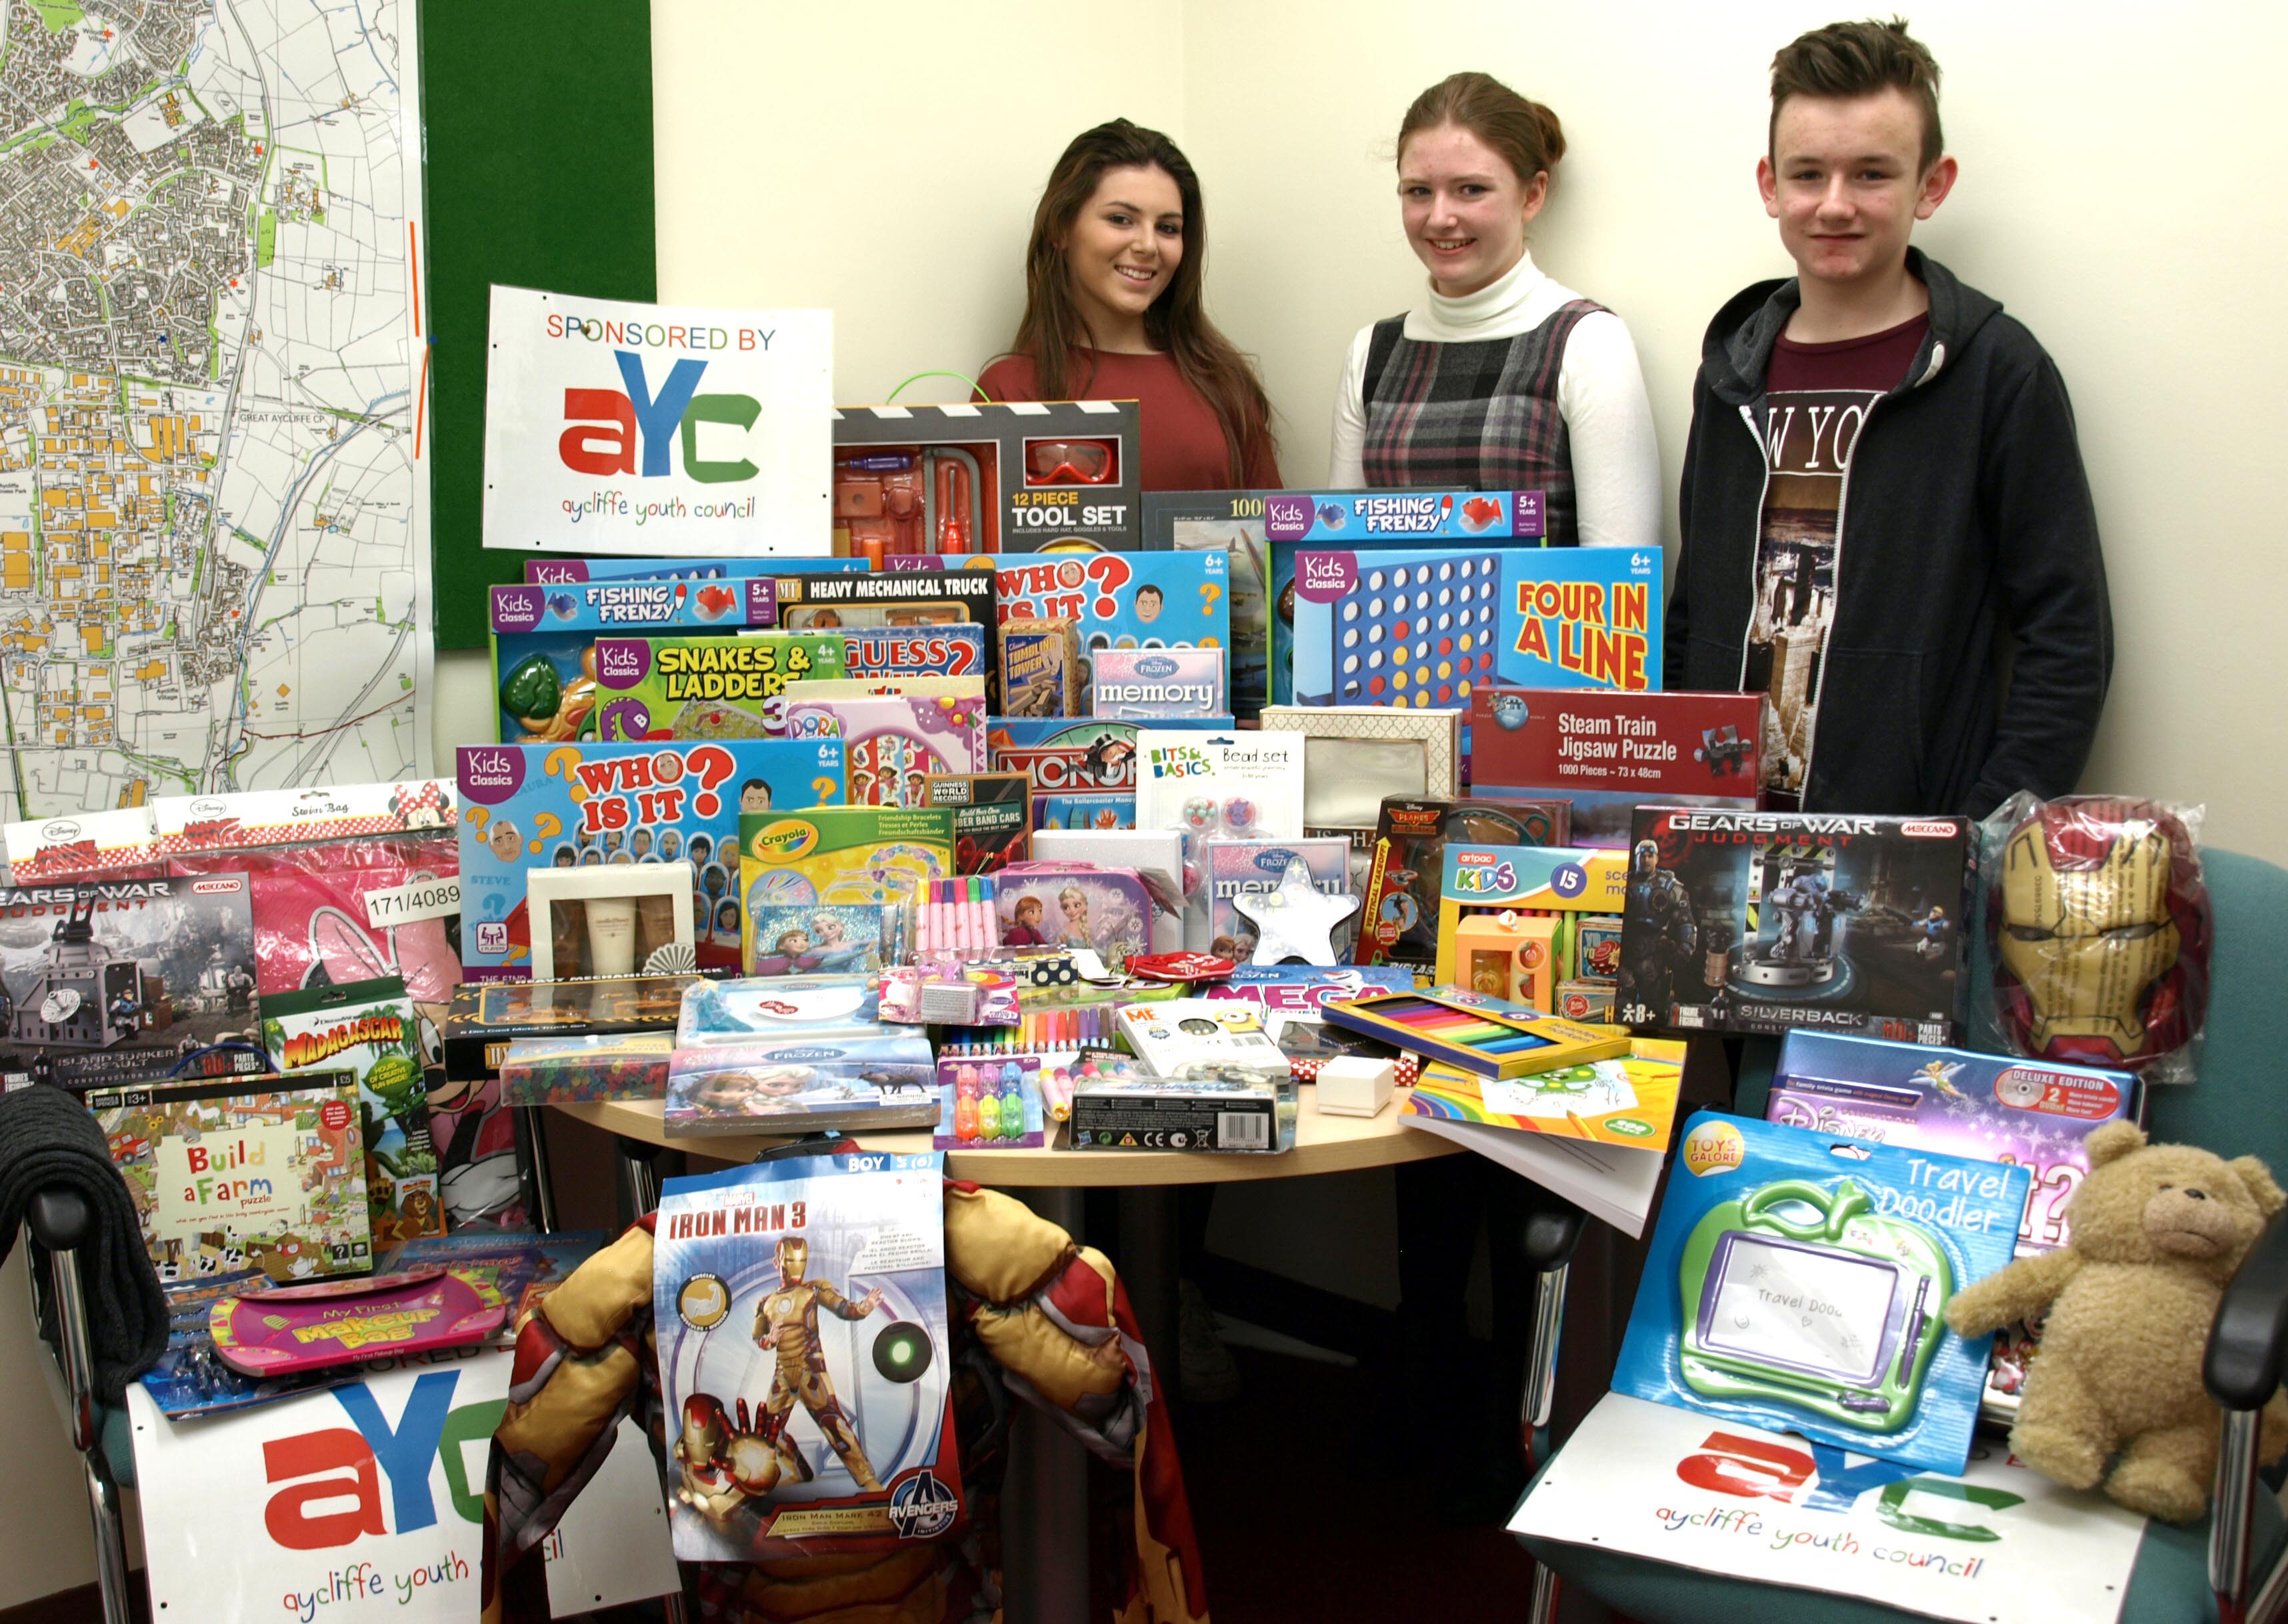 Youth Council Toy Appeal